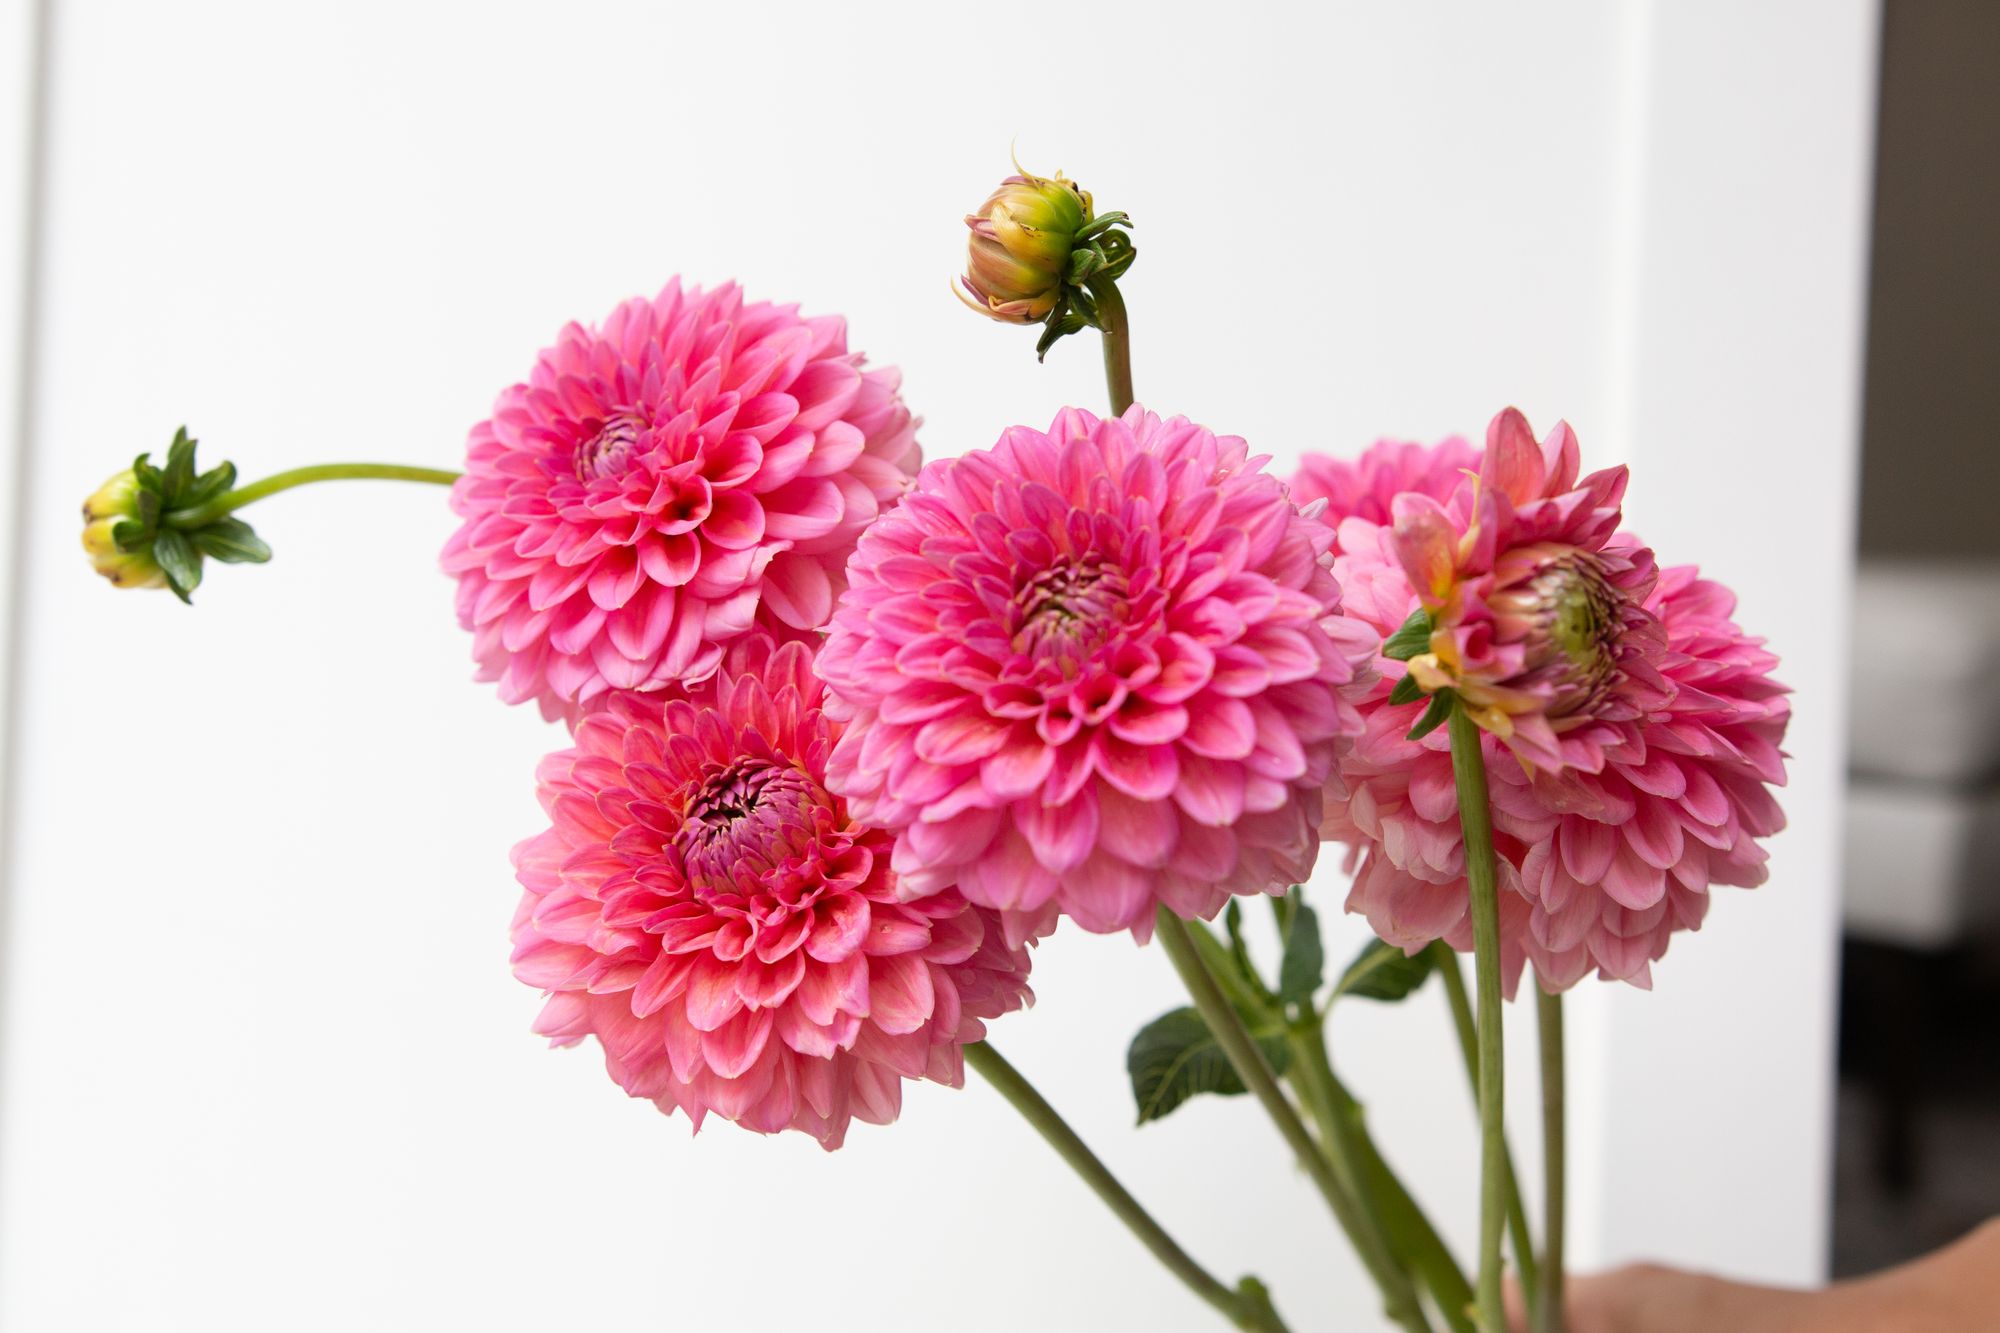 Dahlia small pink bunch